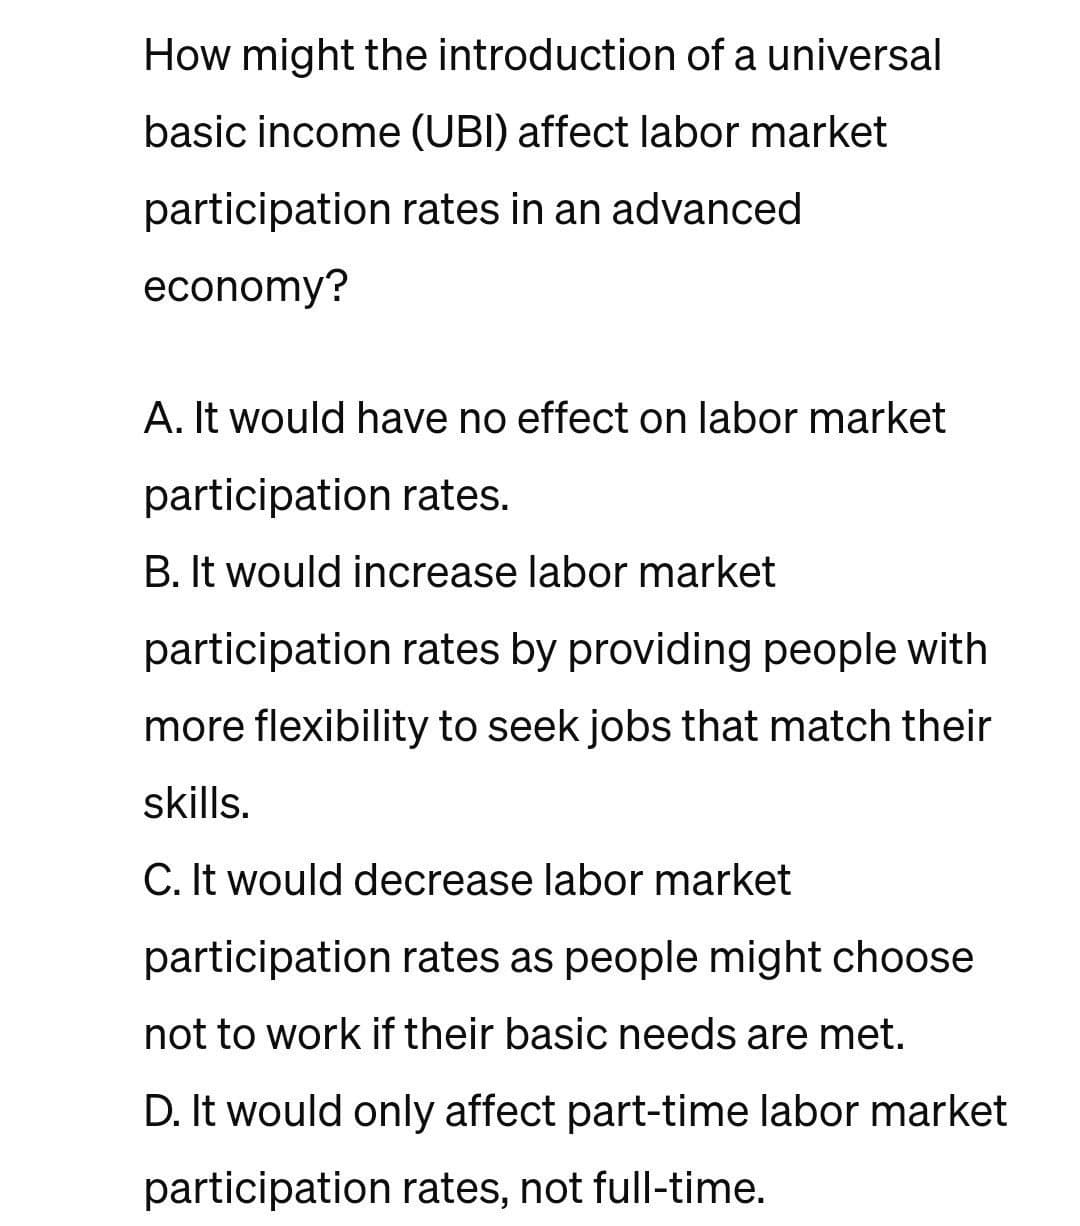 How might the introduction of a universal
basic income (UBI) affect labor market
participation rates in an advanced
economy?
A. It would have no effect on labor market
participation rates.
B. It would increase labor market
participation rates by providing people with
more flexibility to seek jobs that match their
skills.
C. It would decrease labor market
participation rates as people might choose
not to work if their basic needs are met.
D. It would only affect part-time labor market
participation rates, not full-time.